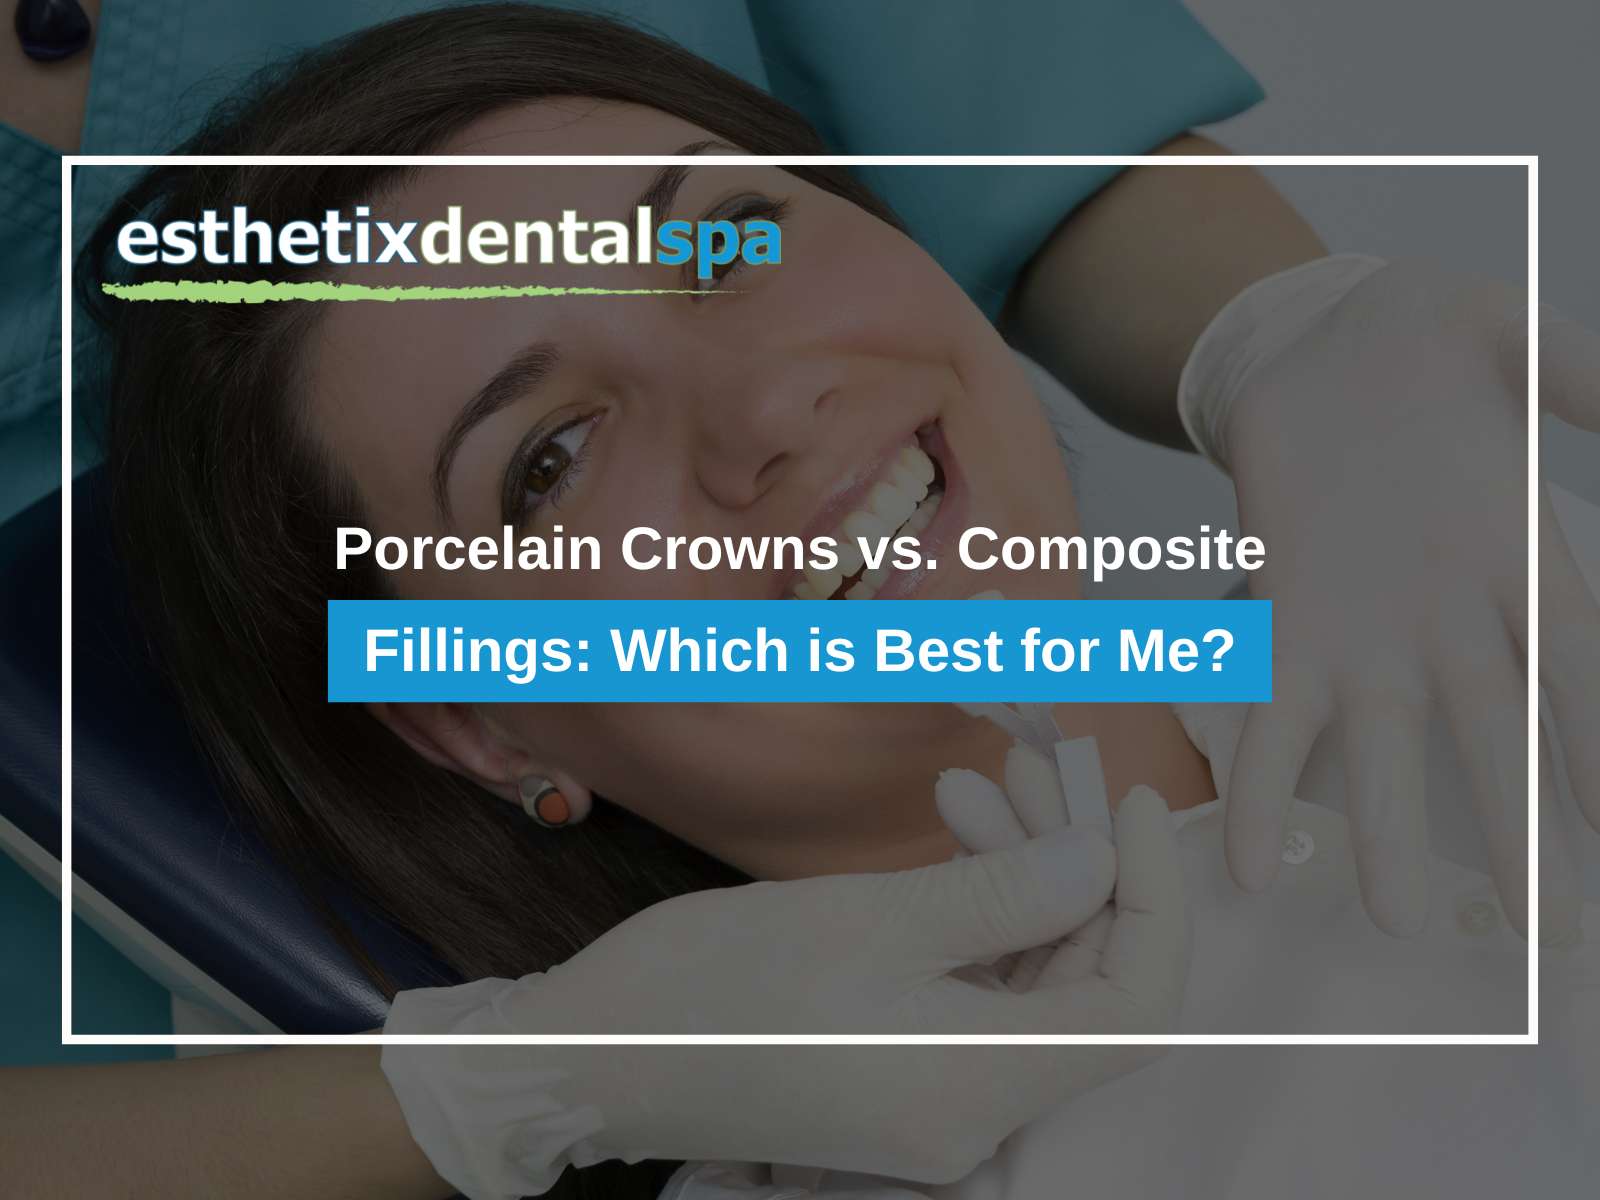 Porcelain Crowns vs. Composite Fillings: Which is Best for Me?